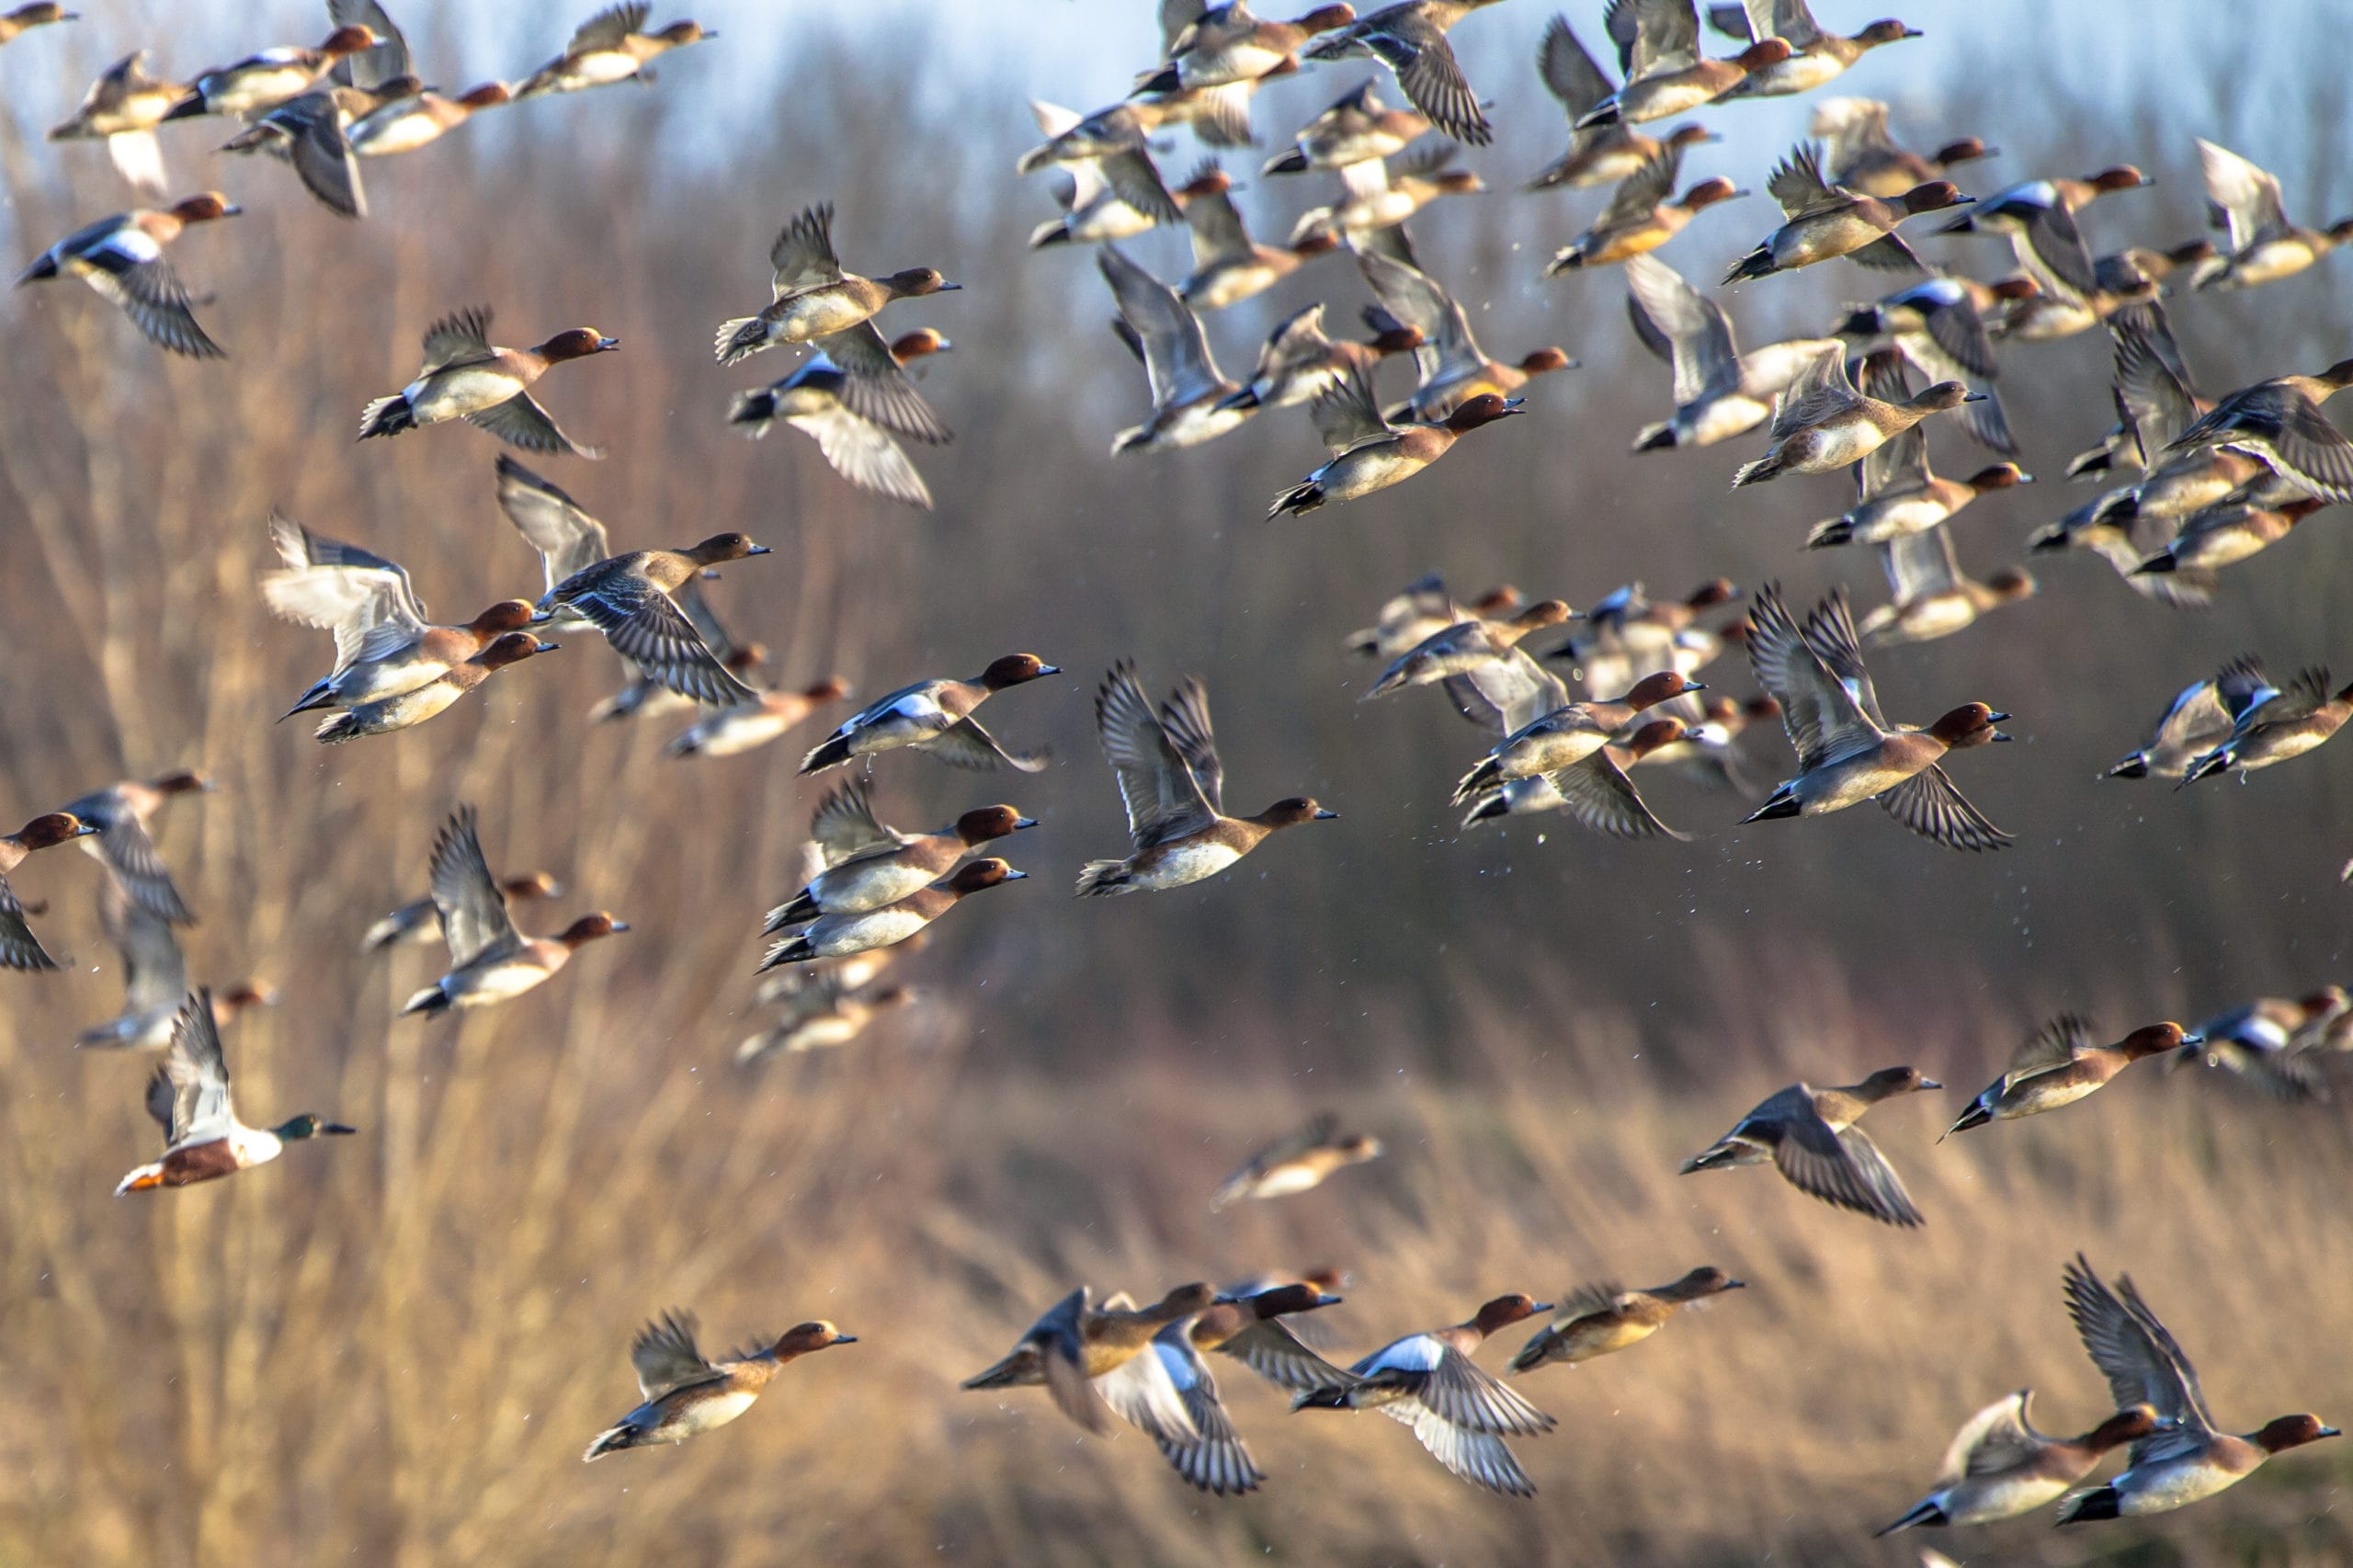 Migrating Eurasian wigeon (Anas penelope) ducks are leaving for the southern hibernating areas in autumn and winter